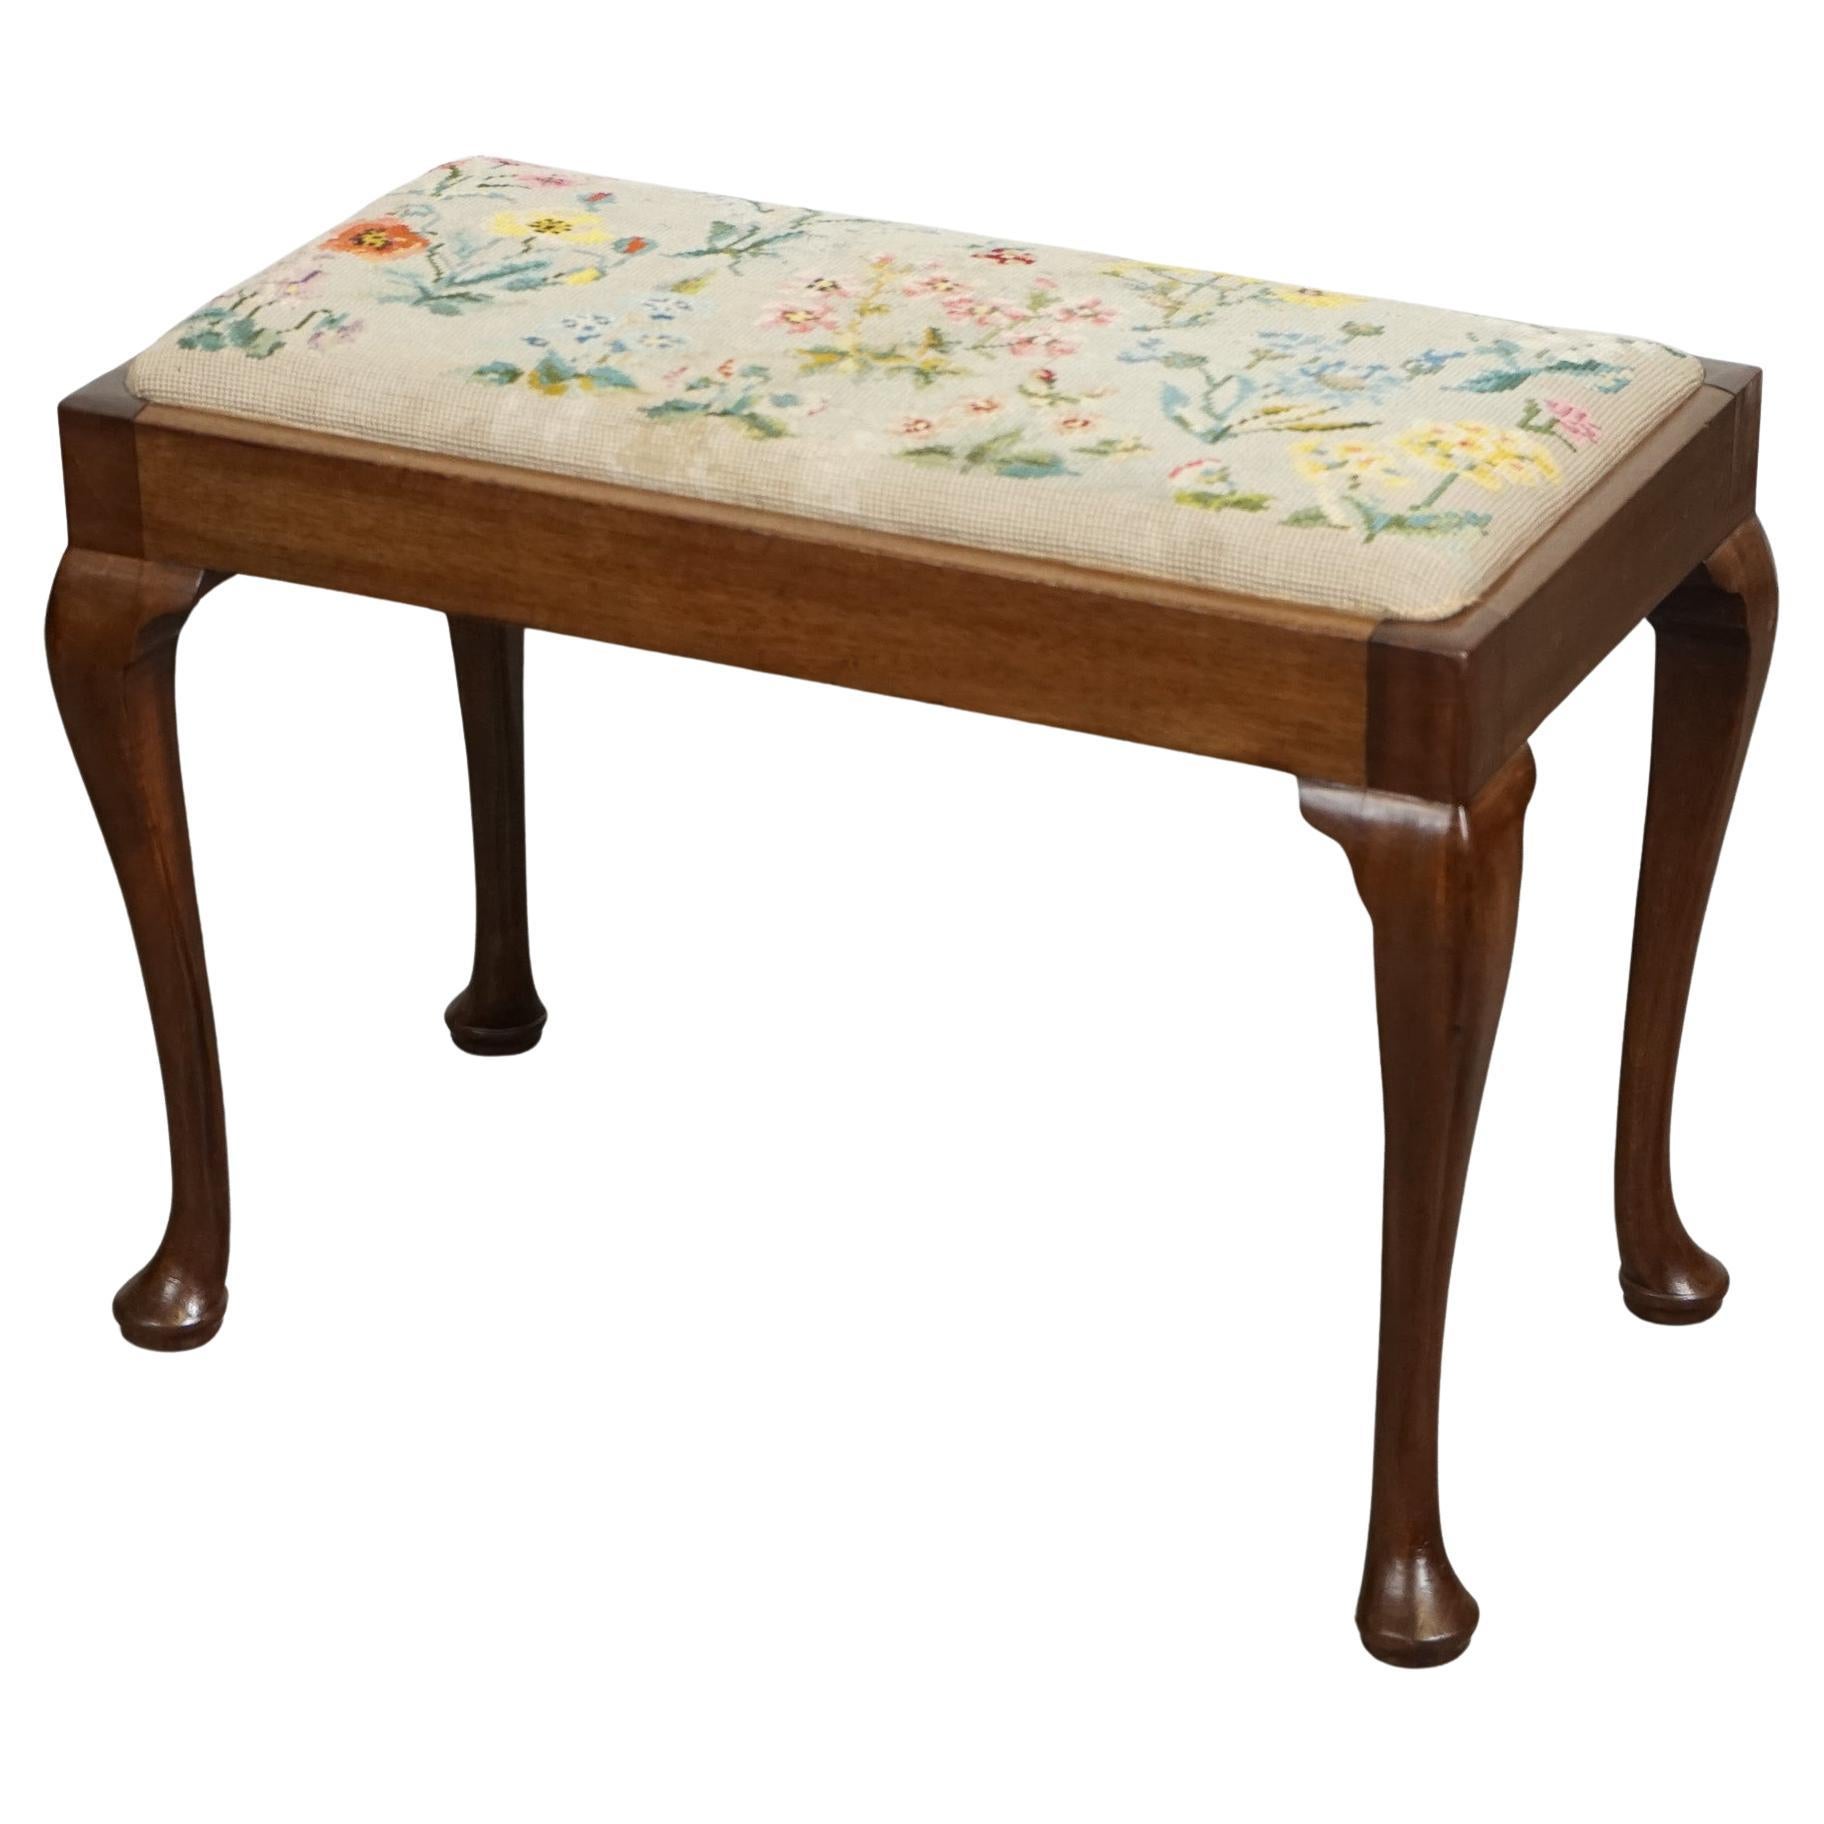 LARGE PIANO DRESSING TABLE STOOL WITH FLOWER STITCHWORK WITH QUEEN ANNE LEGS j1 For Sale